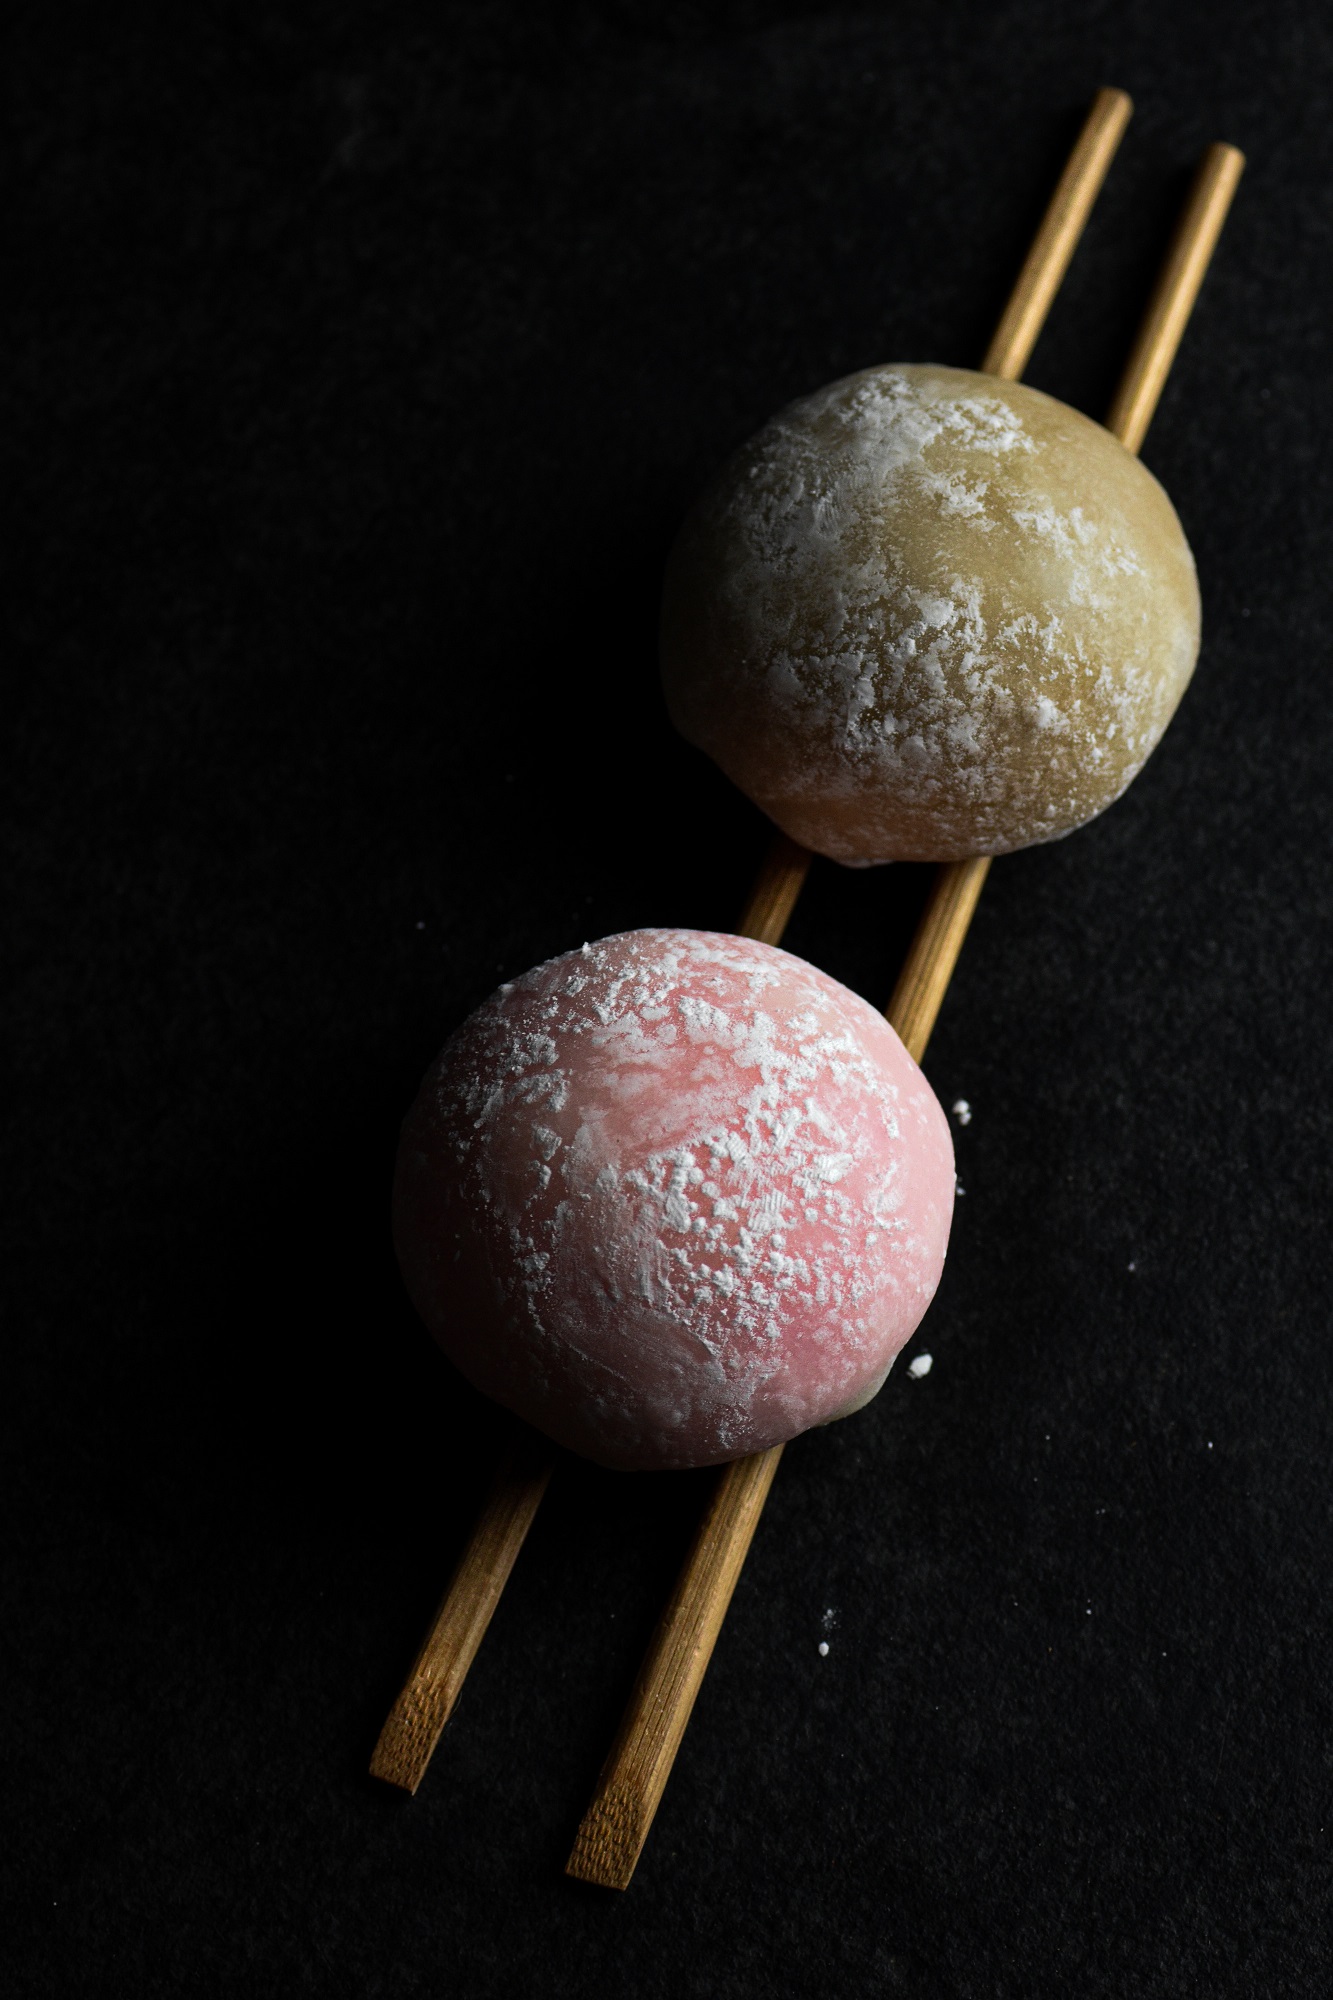 The history of Mochi and how it became so popular in Canada.